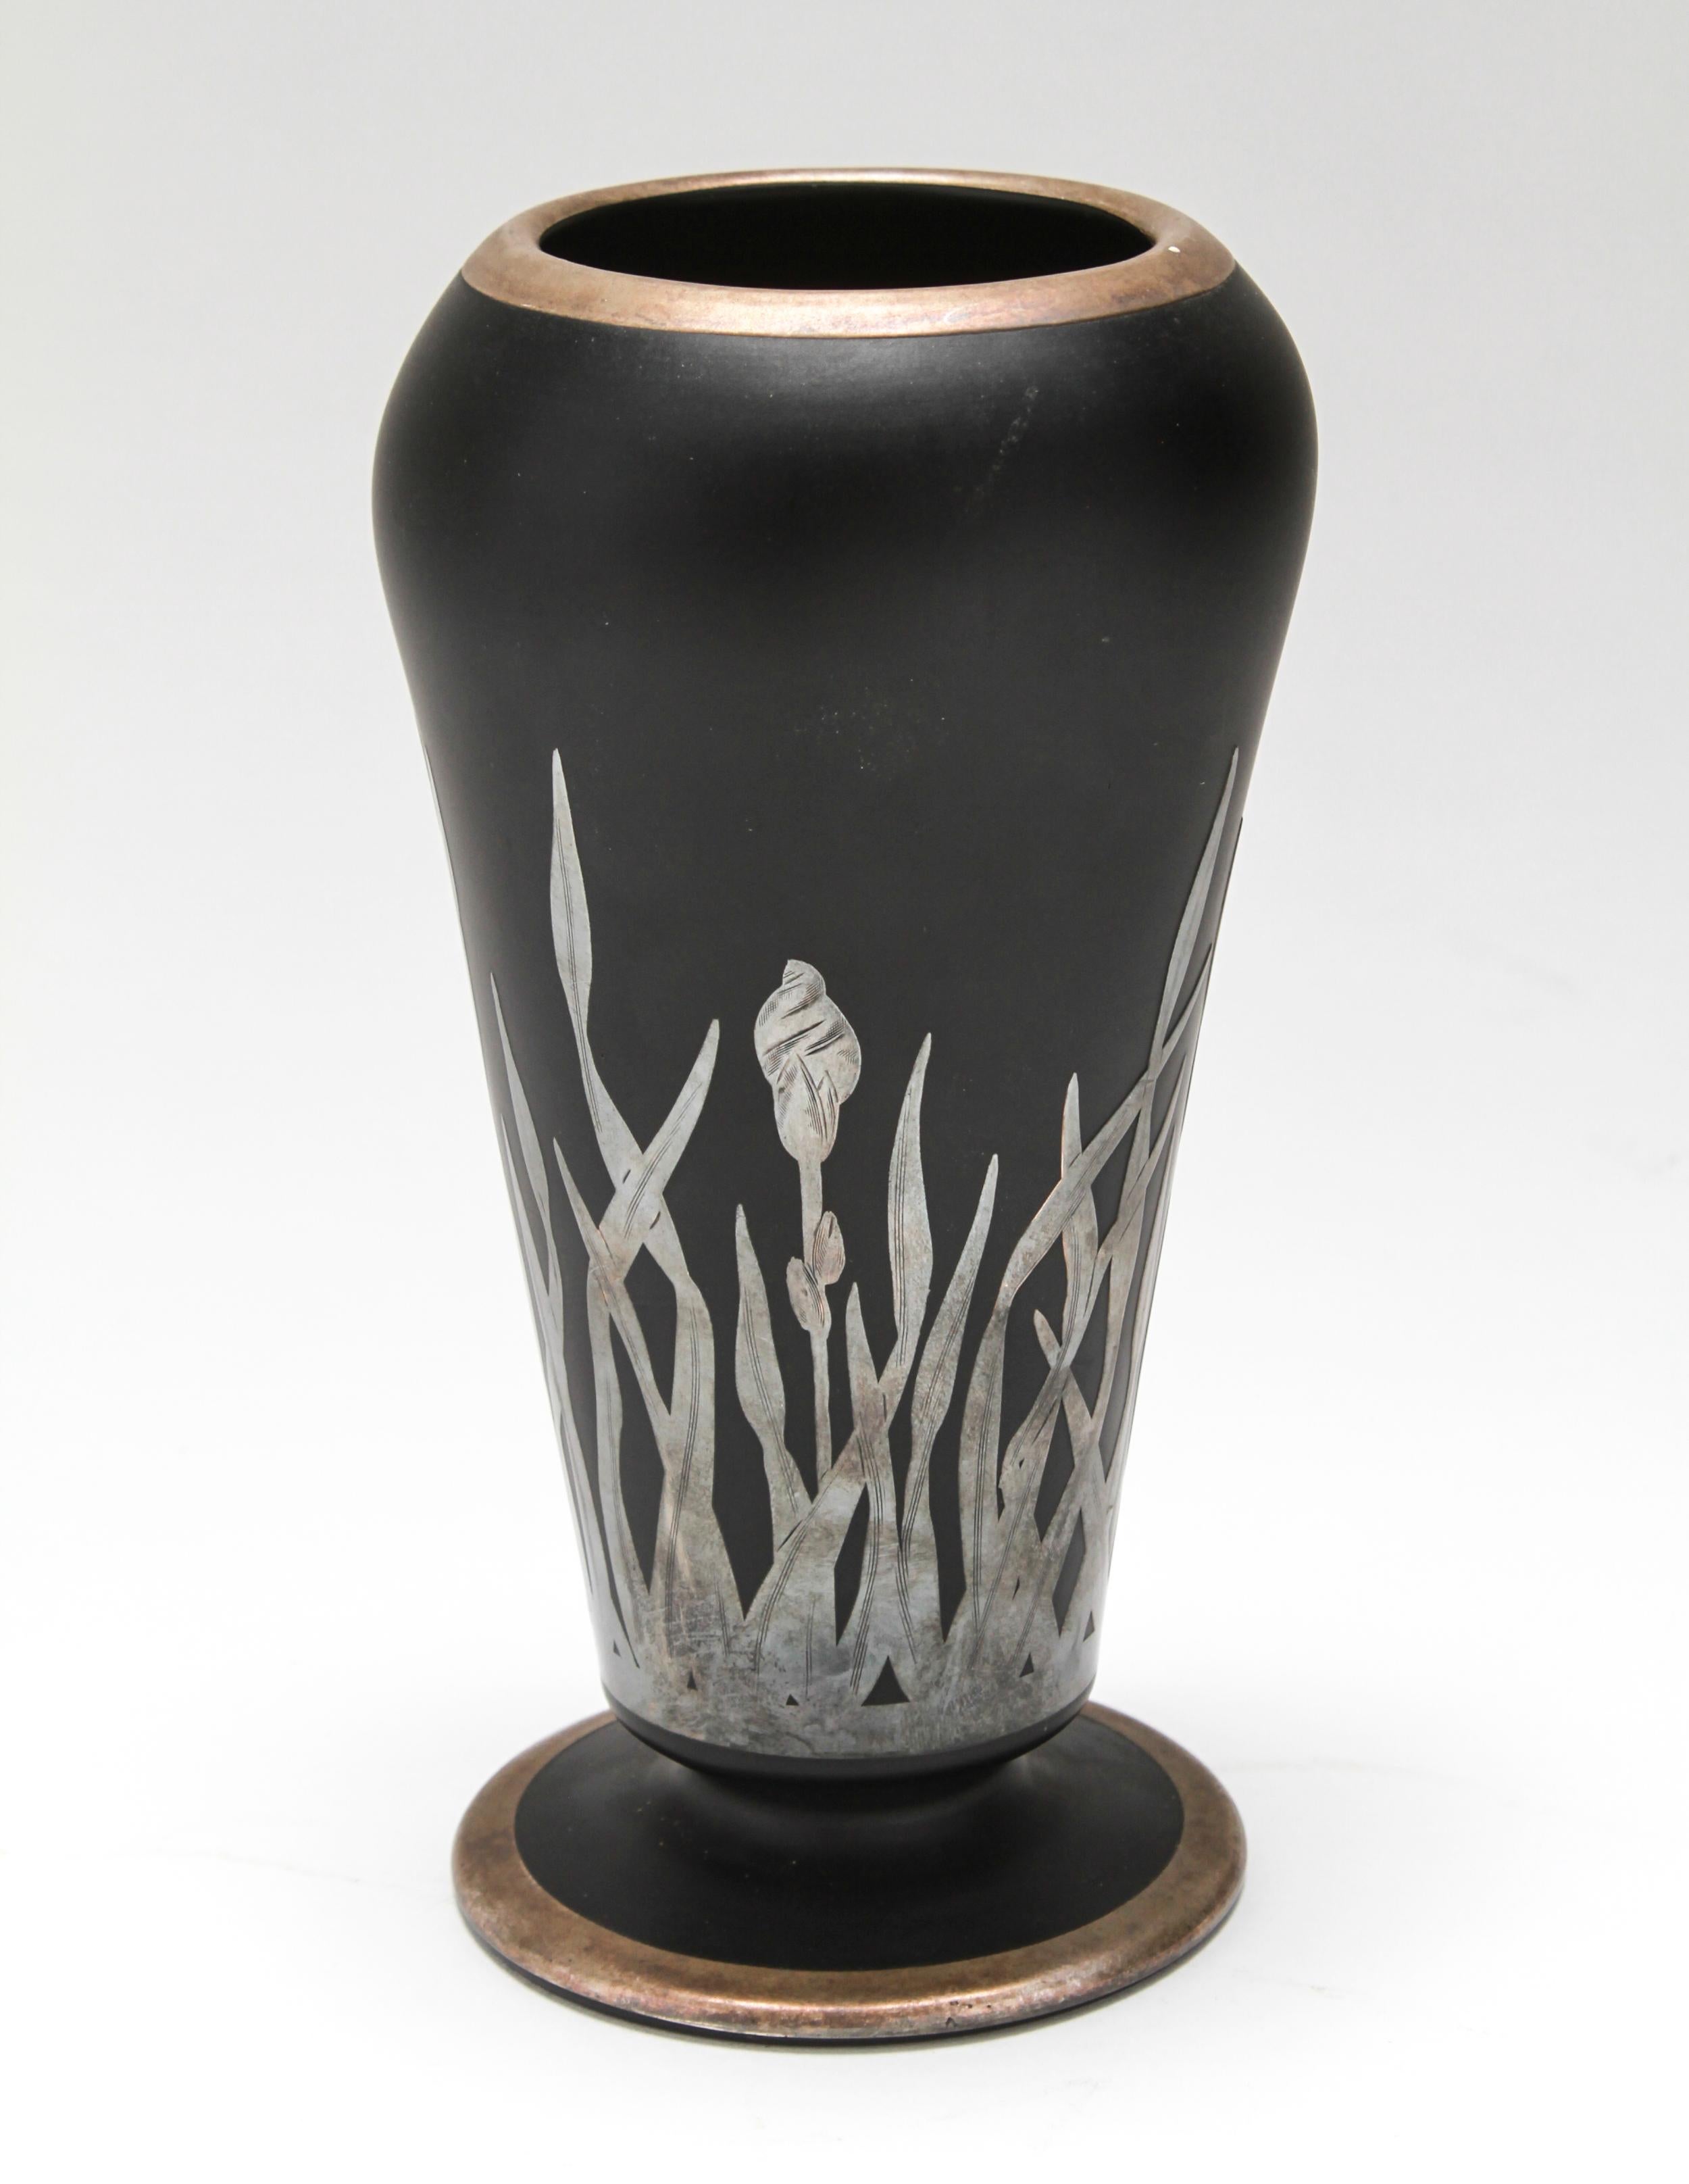 Art Deco period glass vase in satin black glass with silver iris motif overlay, circa 1920. Attributed to Rockwell. The piece is in great vintage condition.